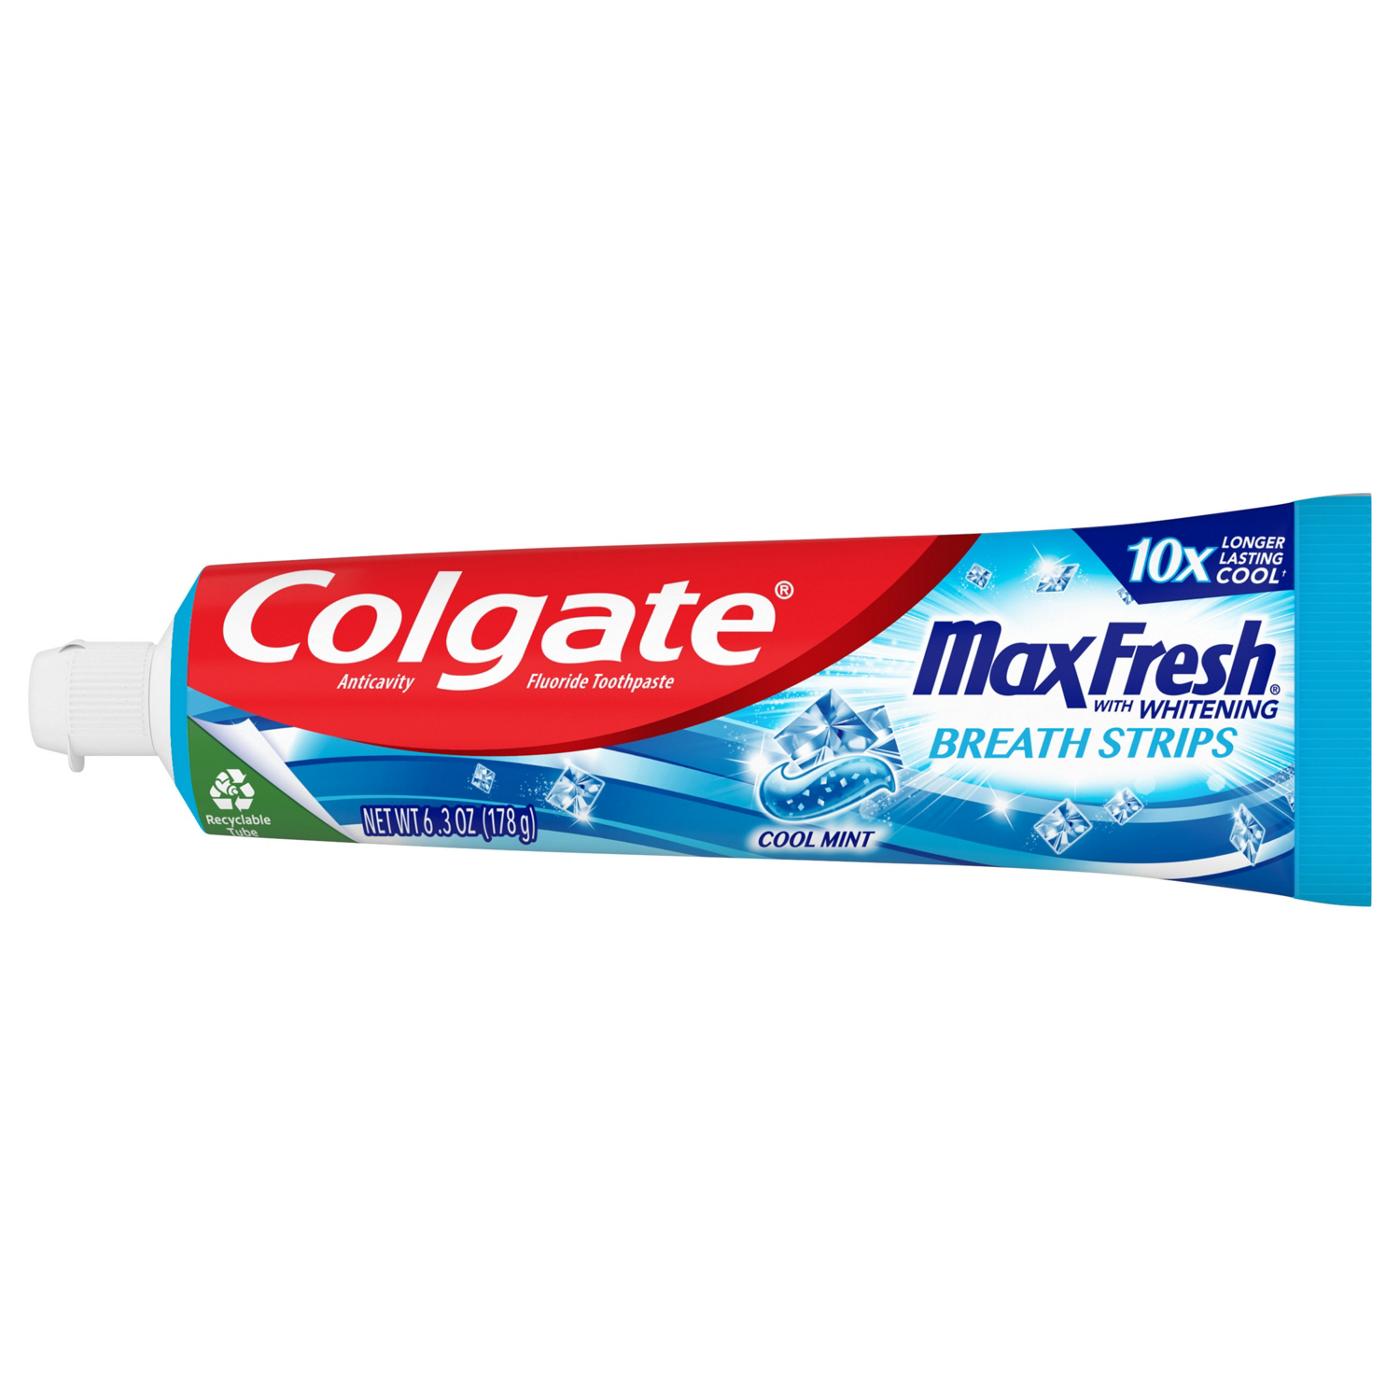 Colgate Max Fresh Anticavity Toothpaste 2 pk - Cool Mint; image 12 of 14